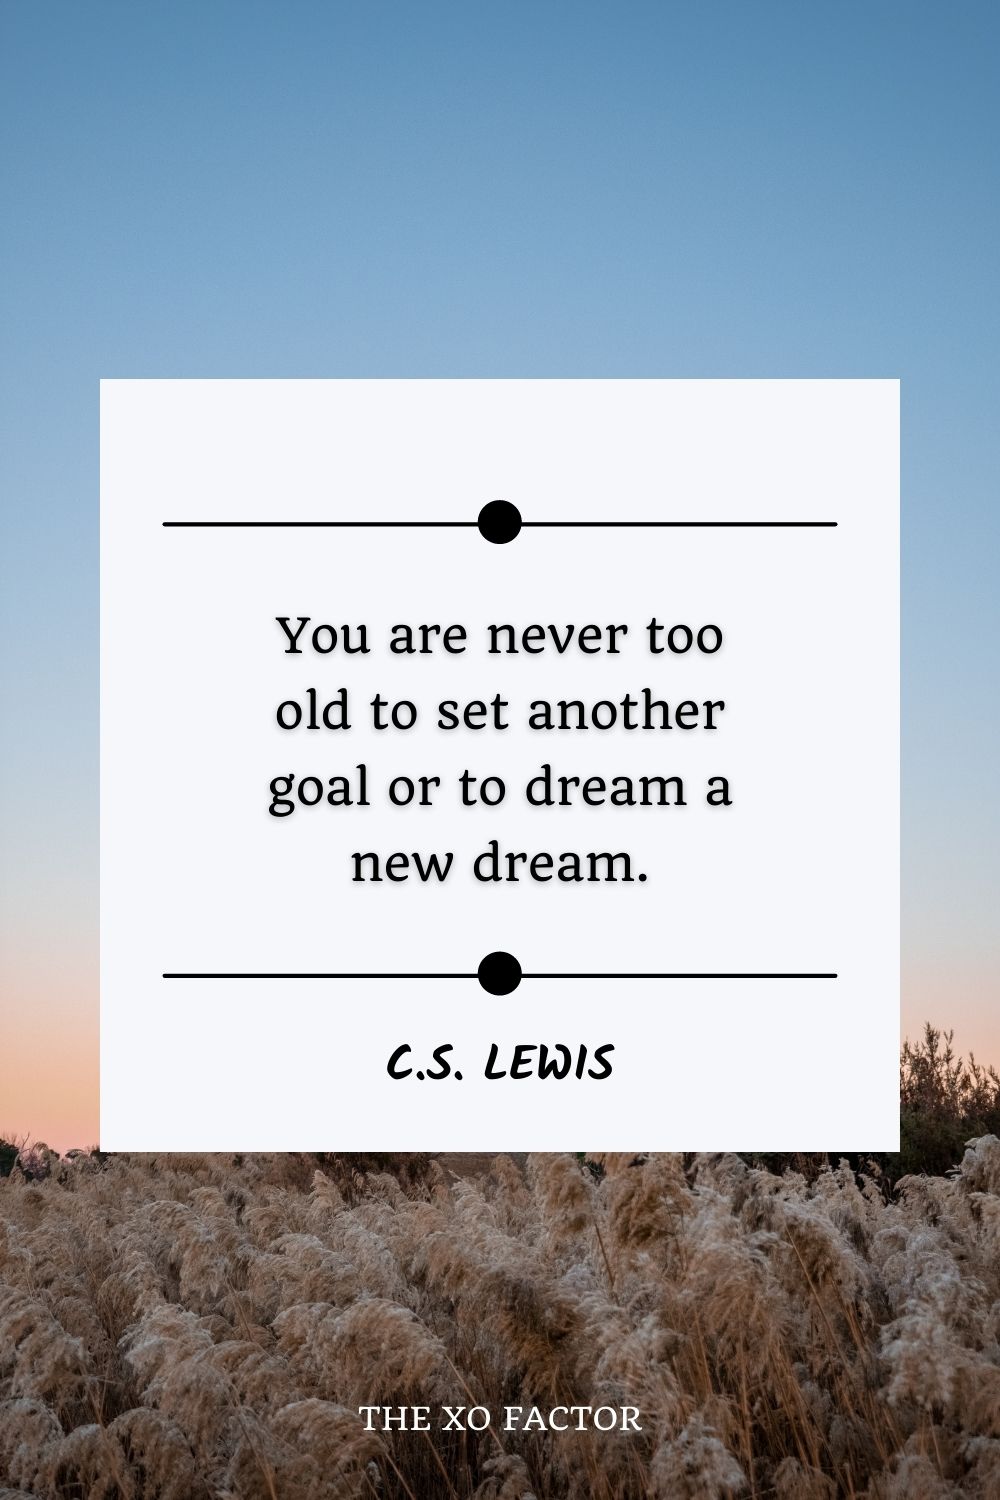 You are never too old to set another goal or to dream a new dream.” – C.S. Lewis